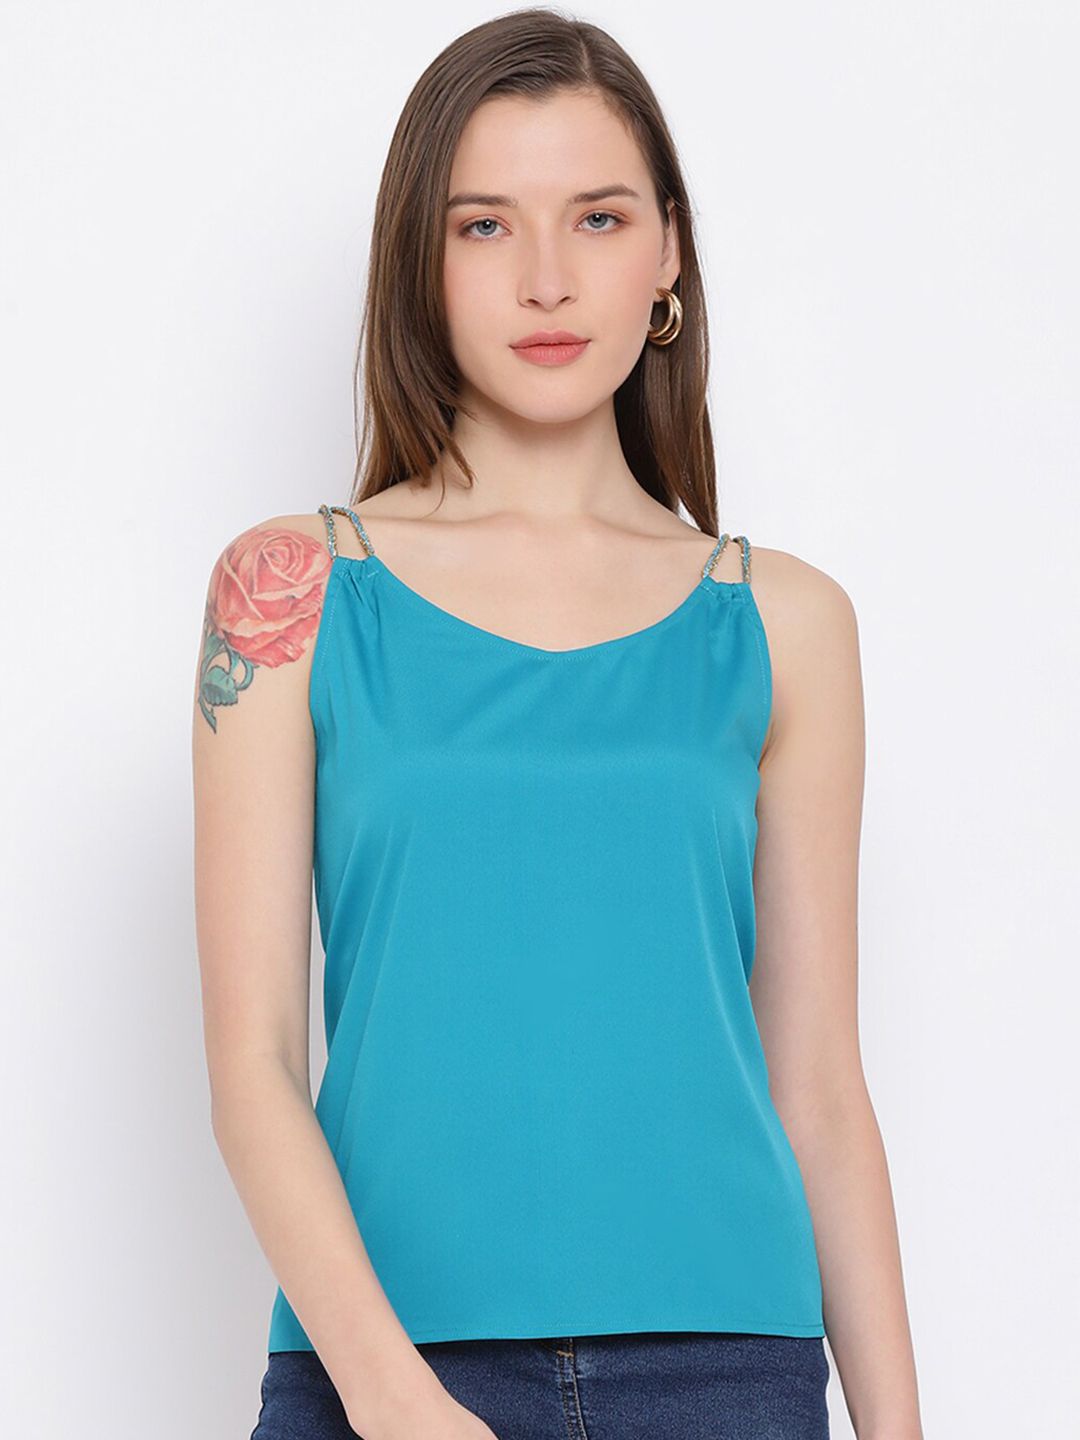 DRAAX Fashions Turquoise Blue Solid Tank Top Price in India